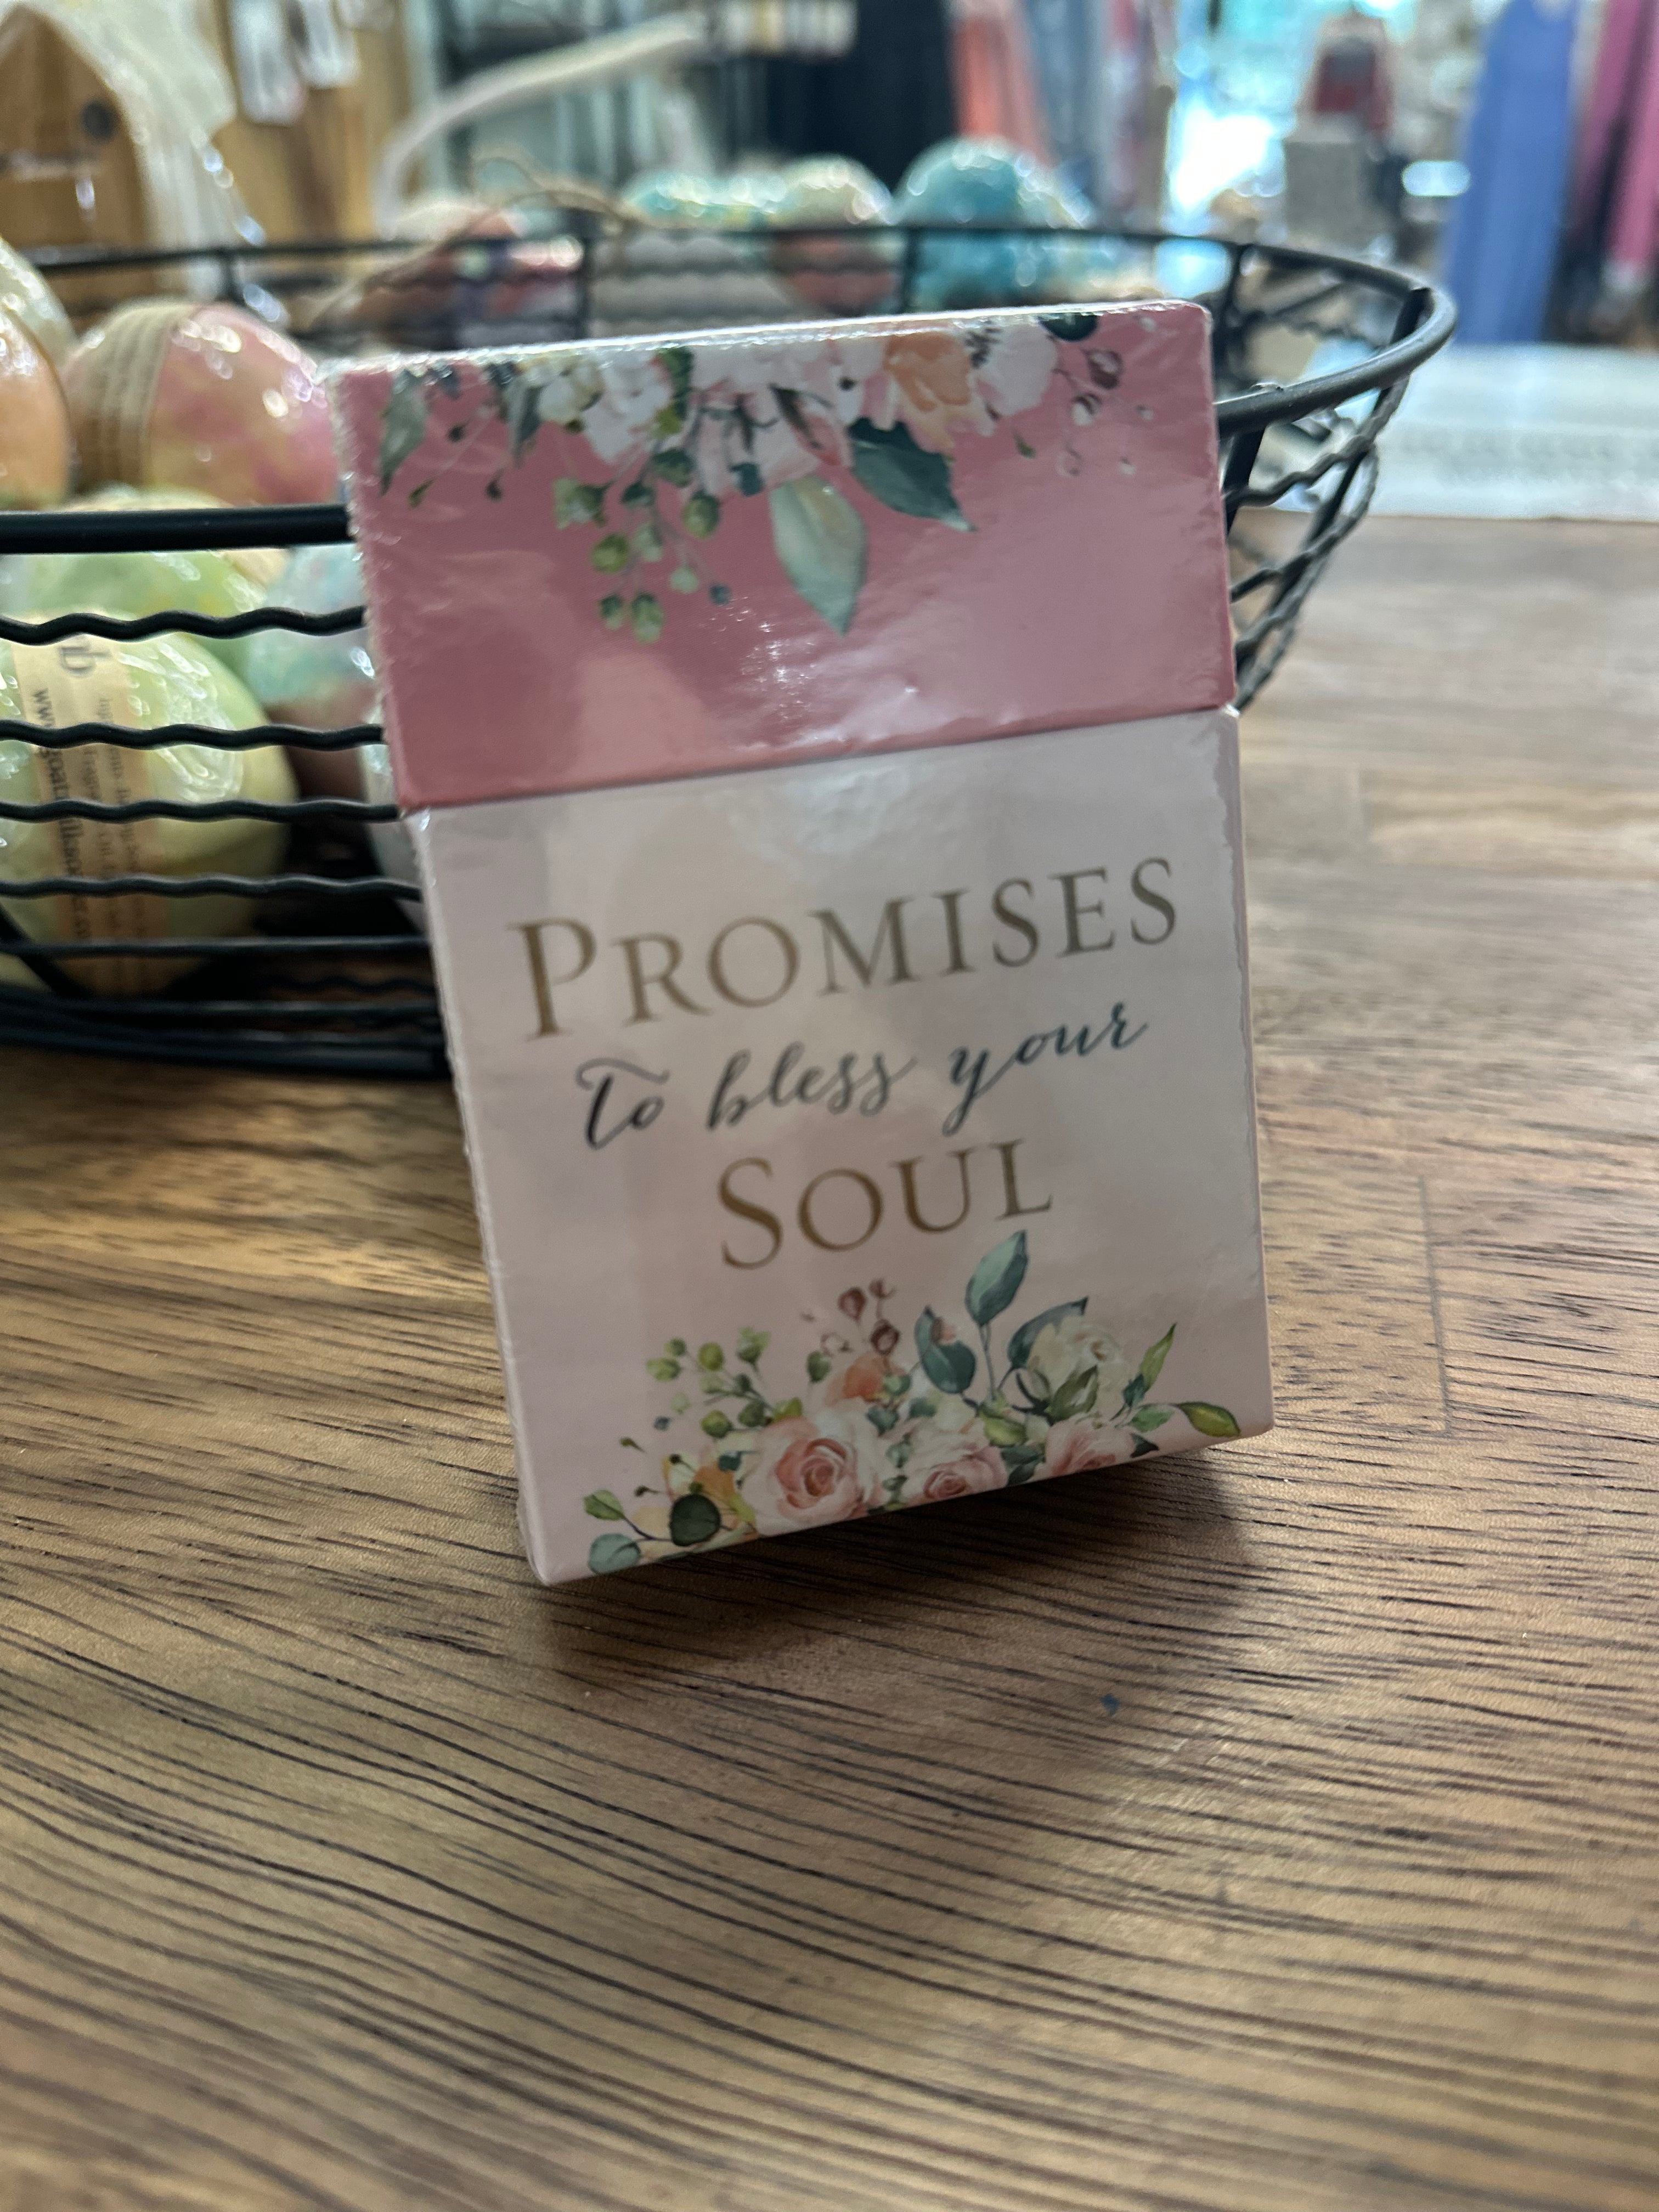 Promise Cards